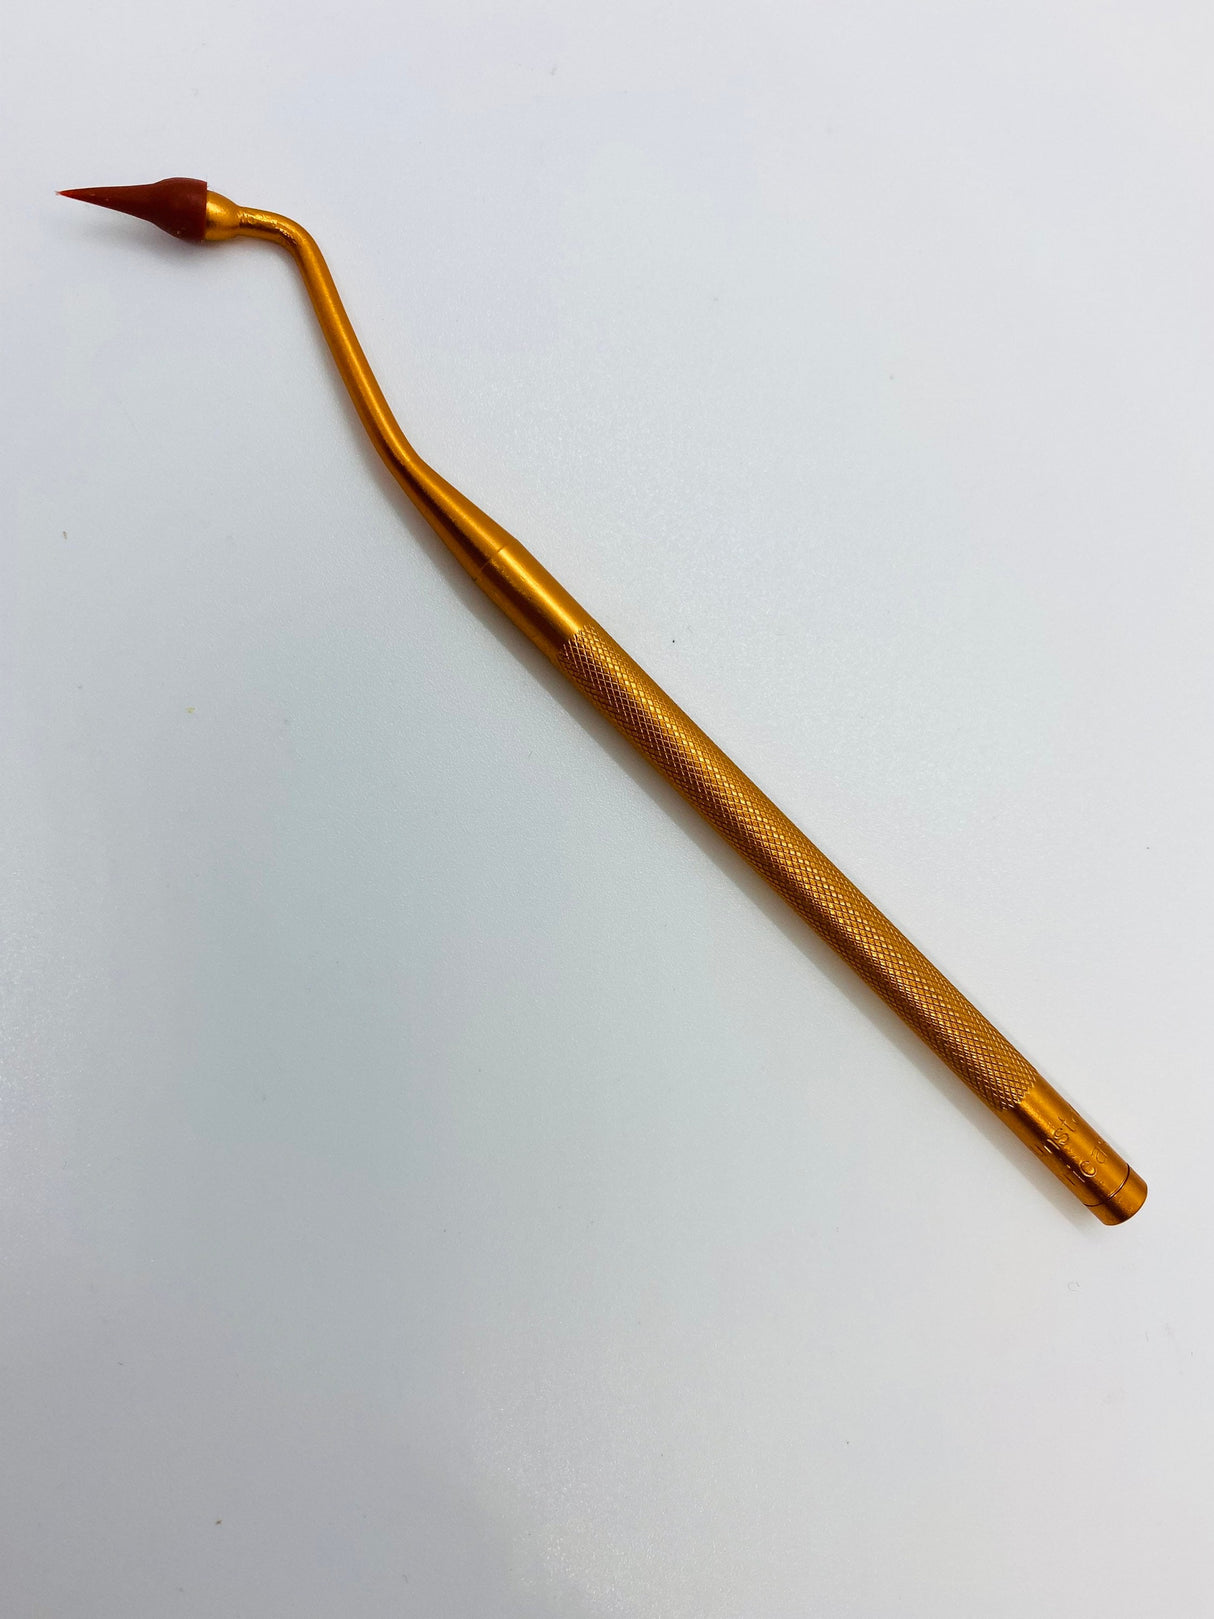 Polymer clay, precious metal (PMC) and ceramic clay sculpting wand tool